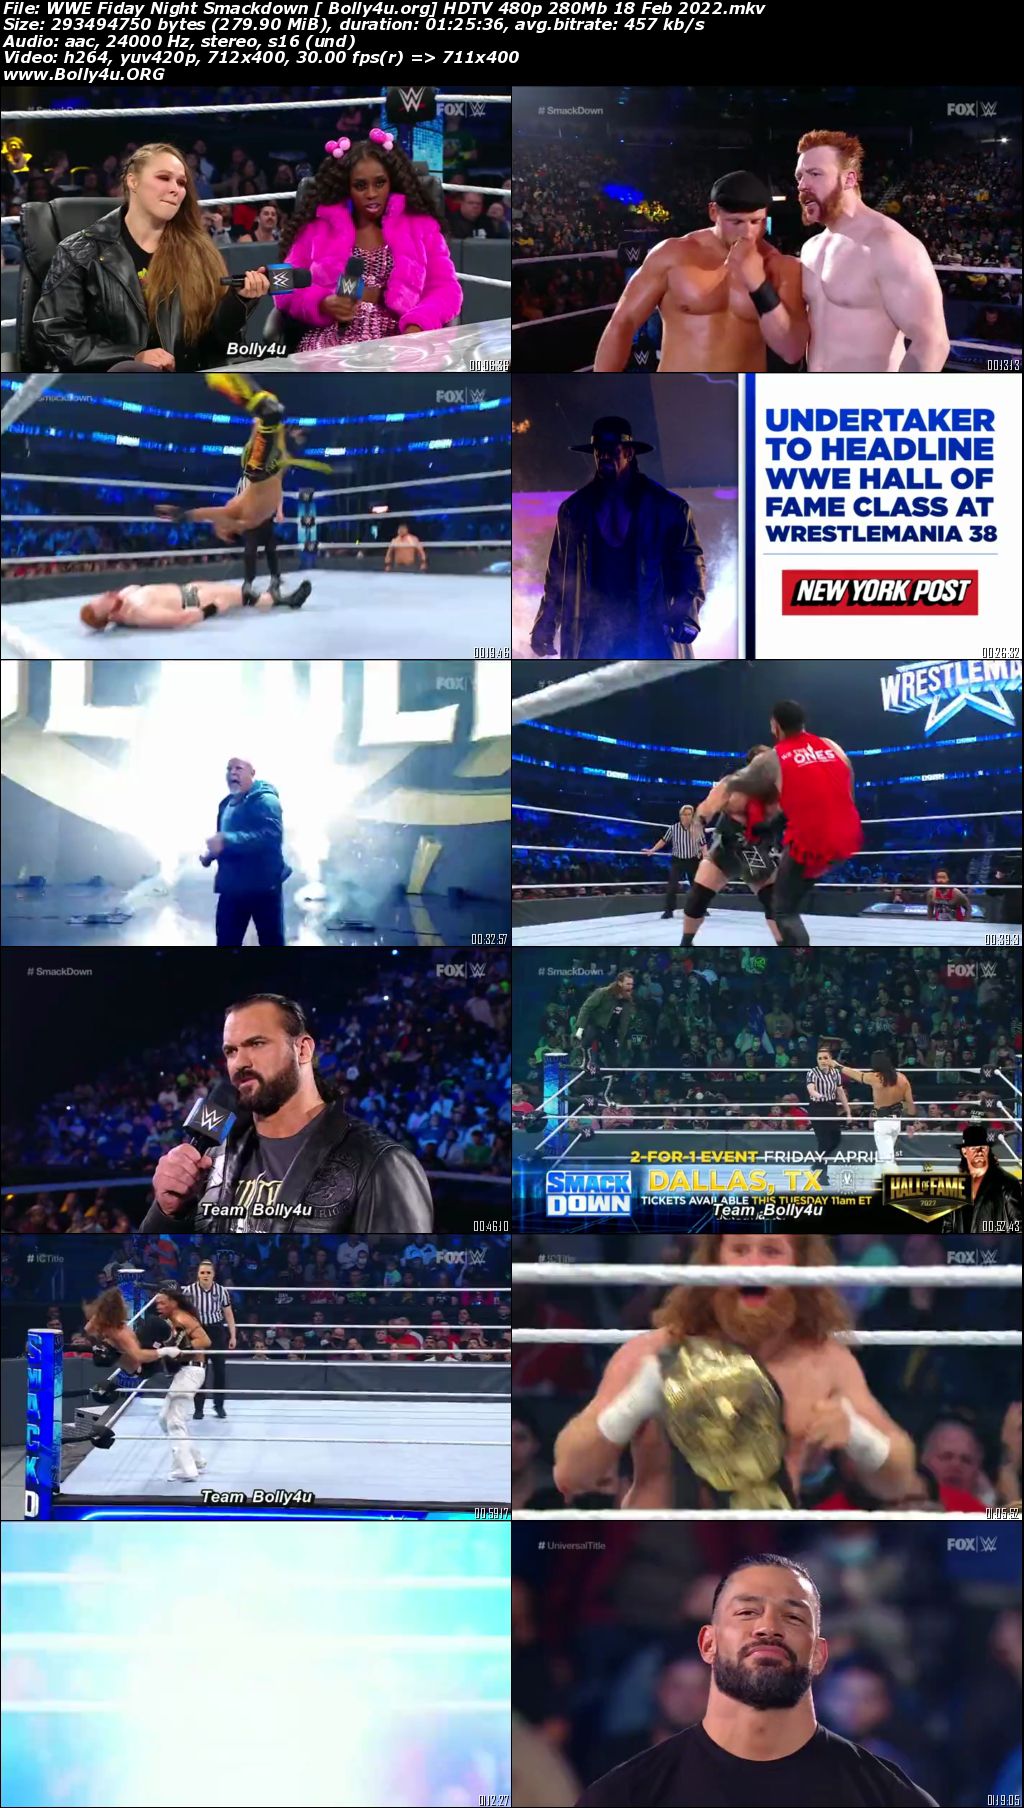 WWE Friday Night Smackdown HDTV 480p 280Mb 18 Feb 2022 Download